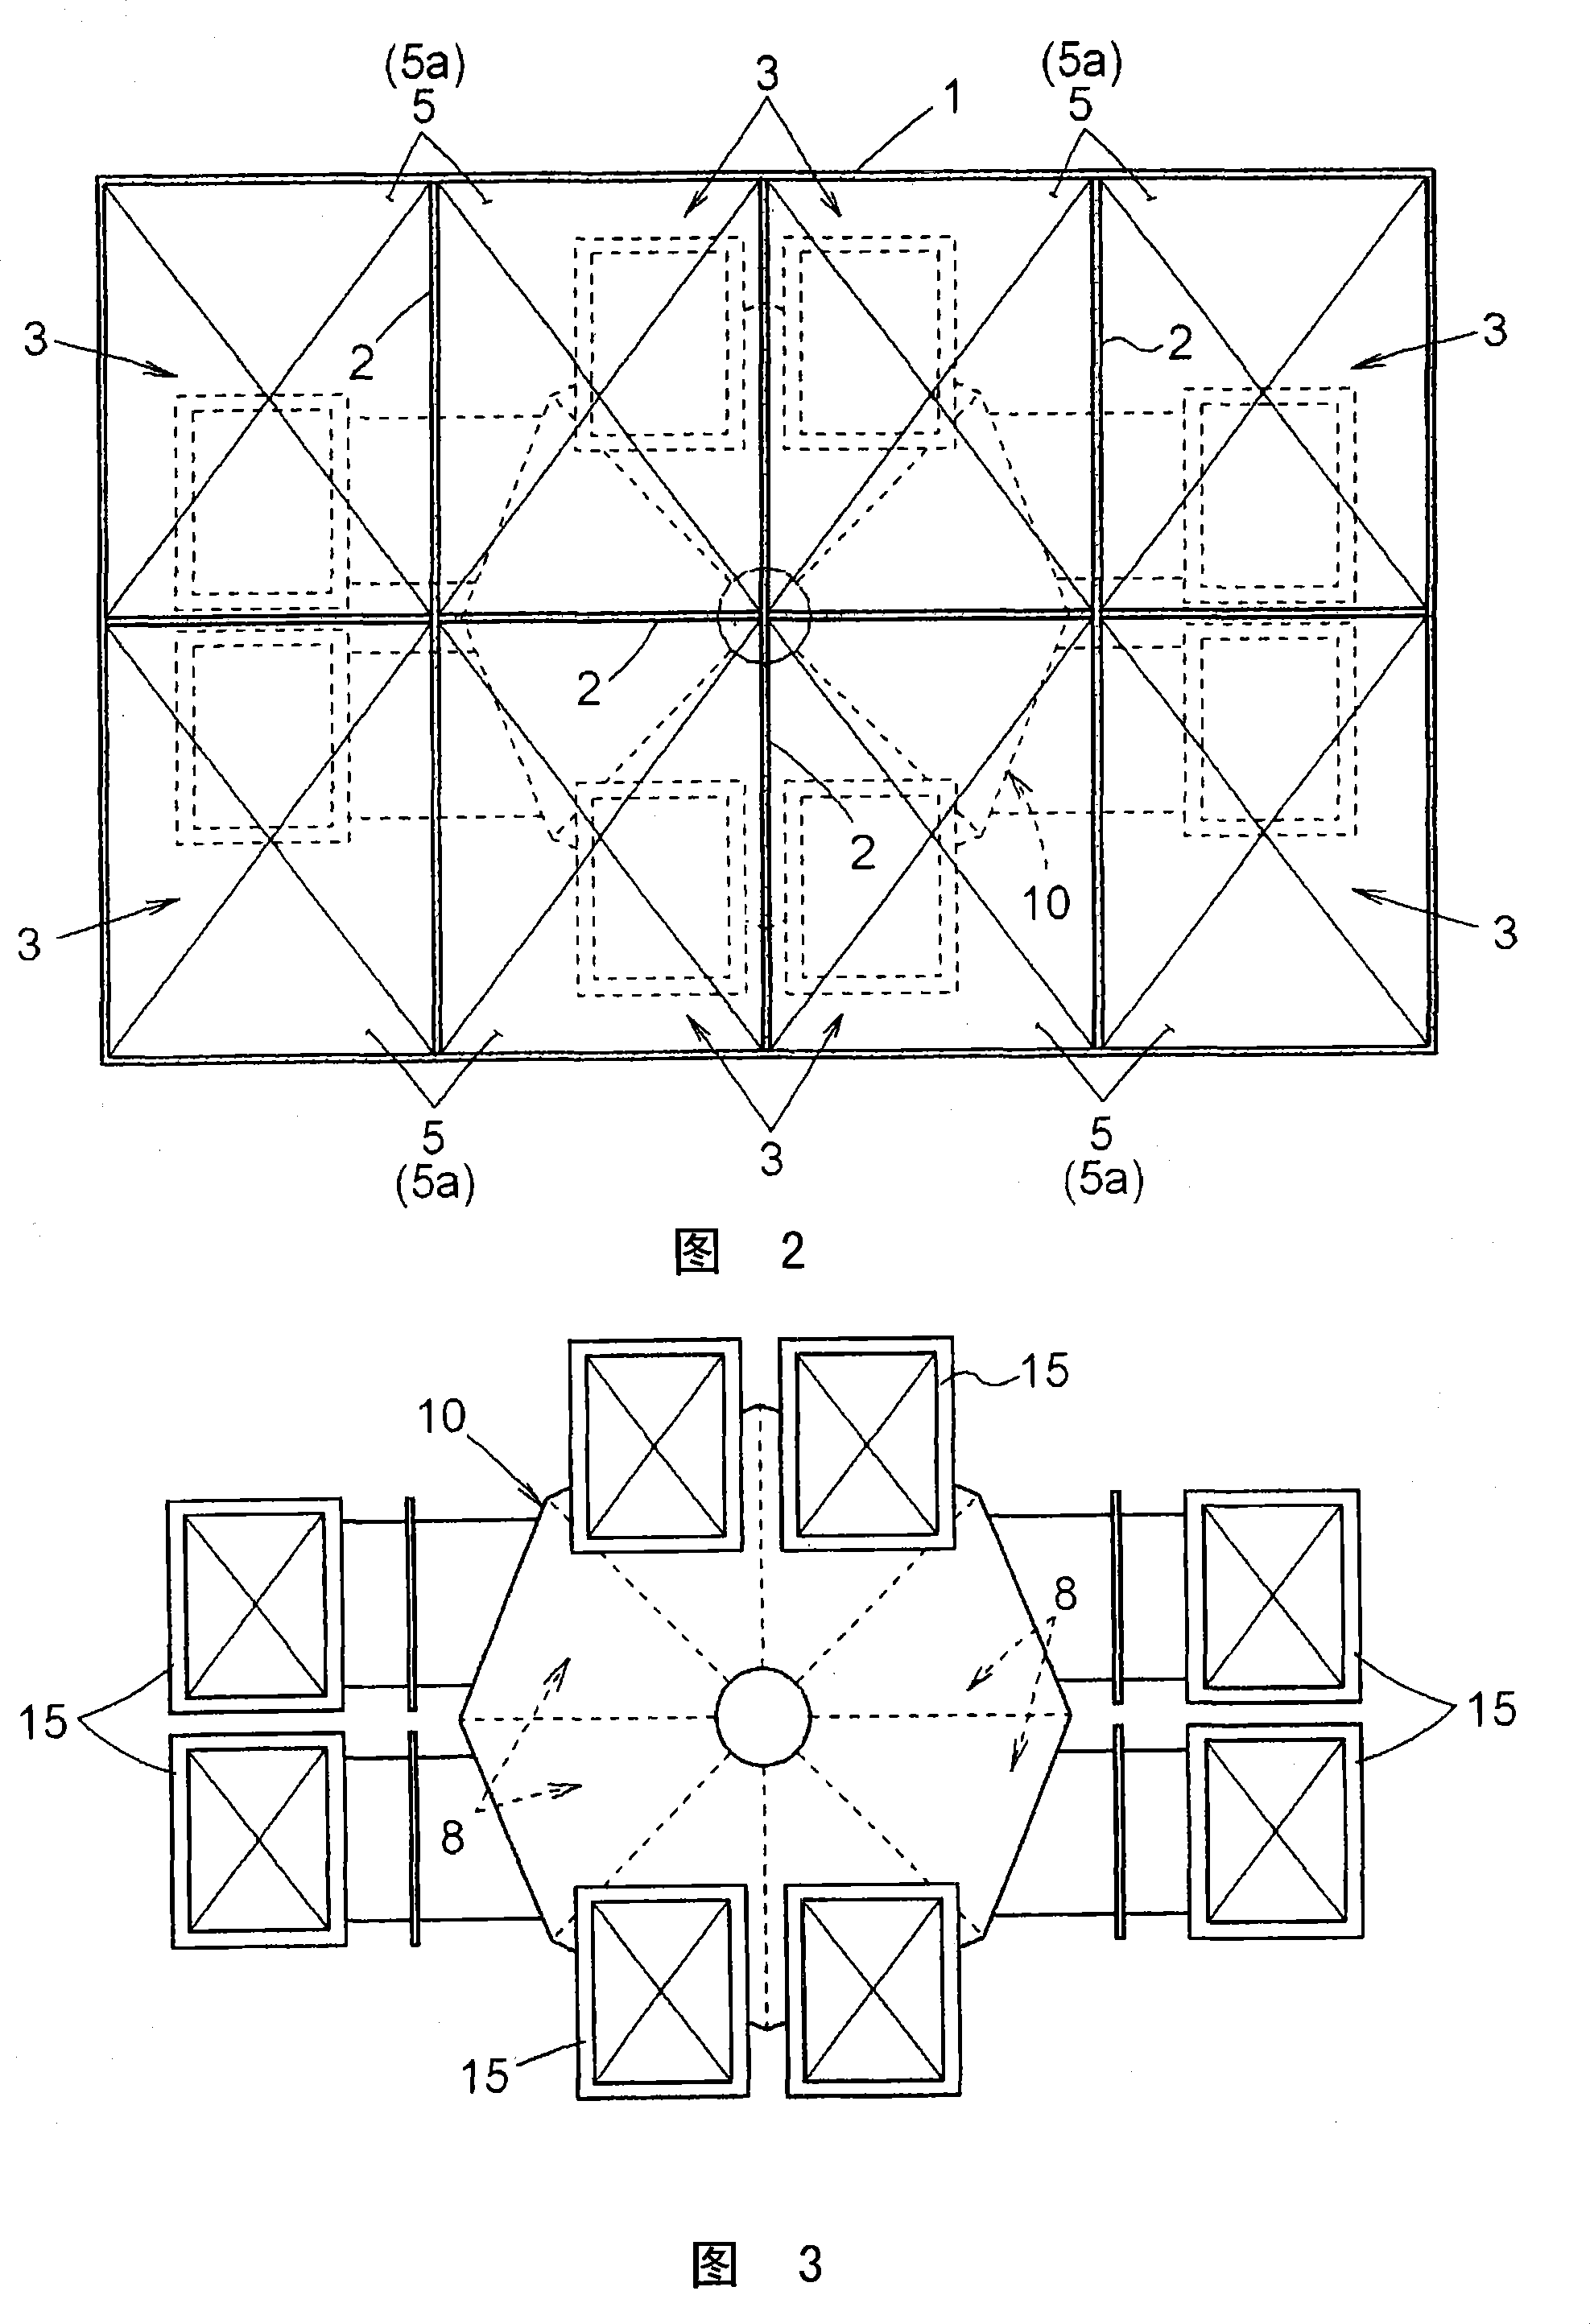 Heat accumulating gas processing system